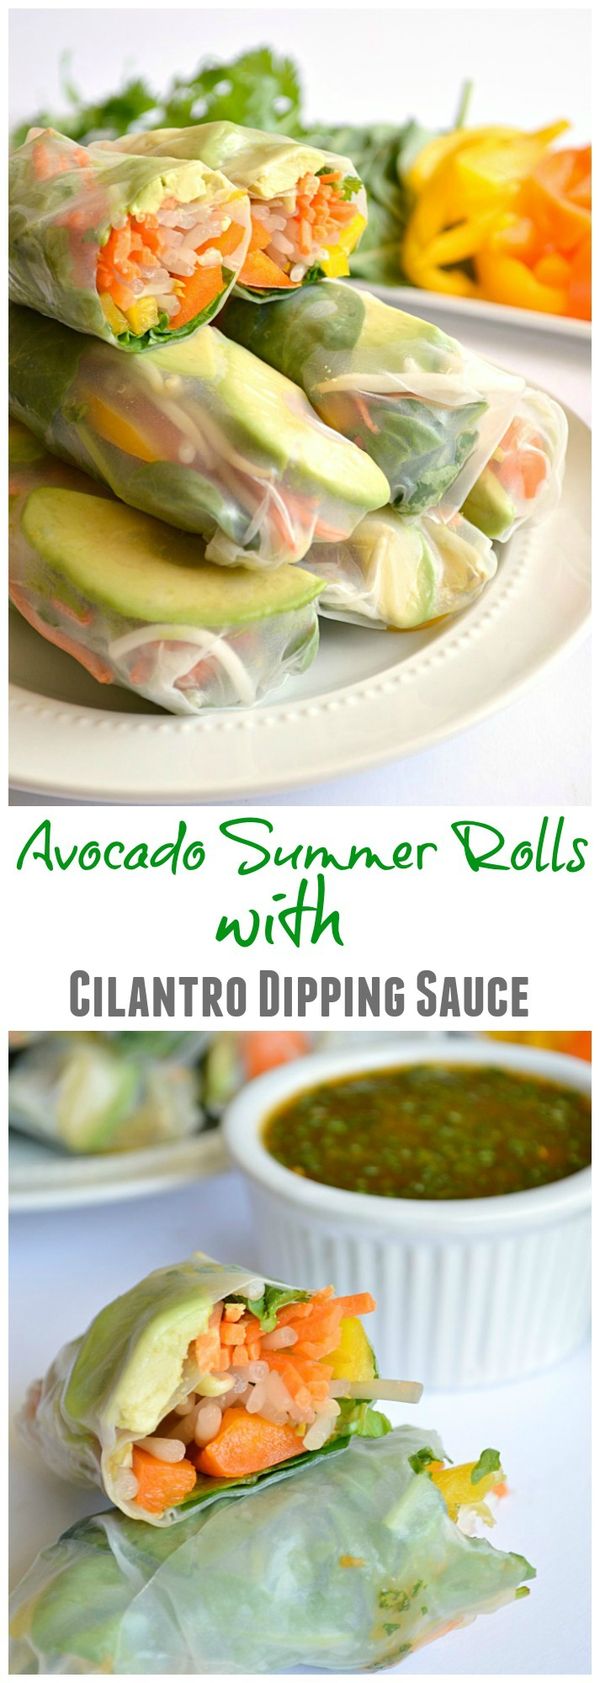 Avocado Summer Rolls with Sweet 'N Spicy Cilantro Dipping Sauce